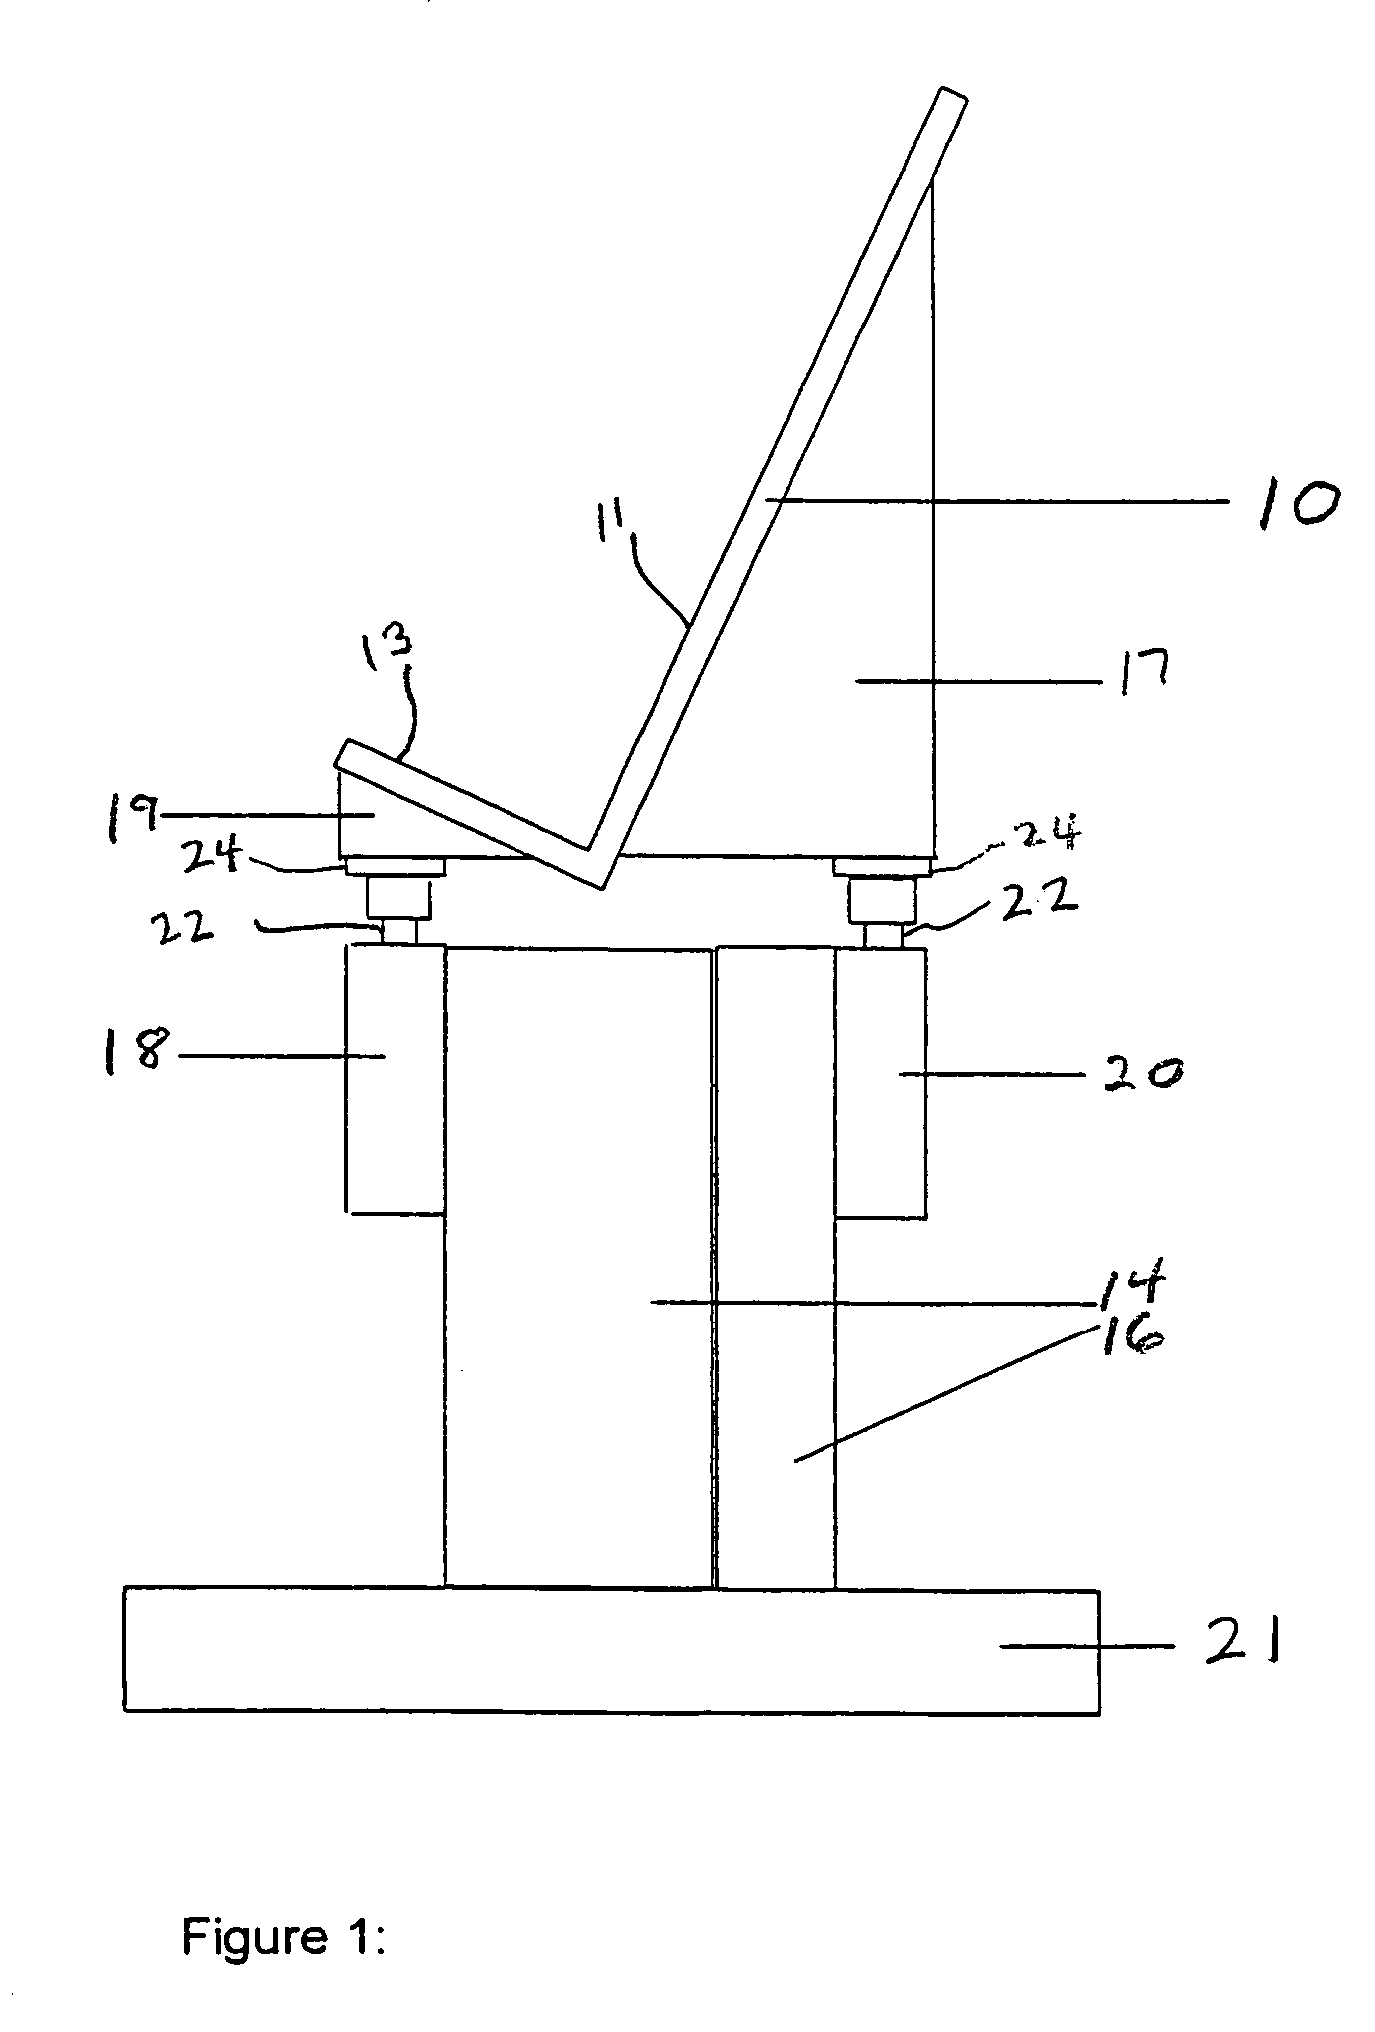 System for high-speed automatic weighing of items in a mail stream